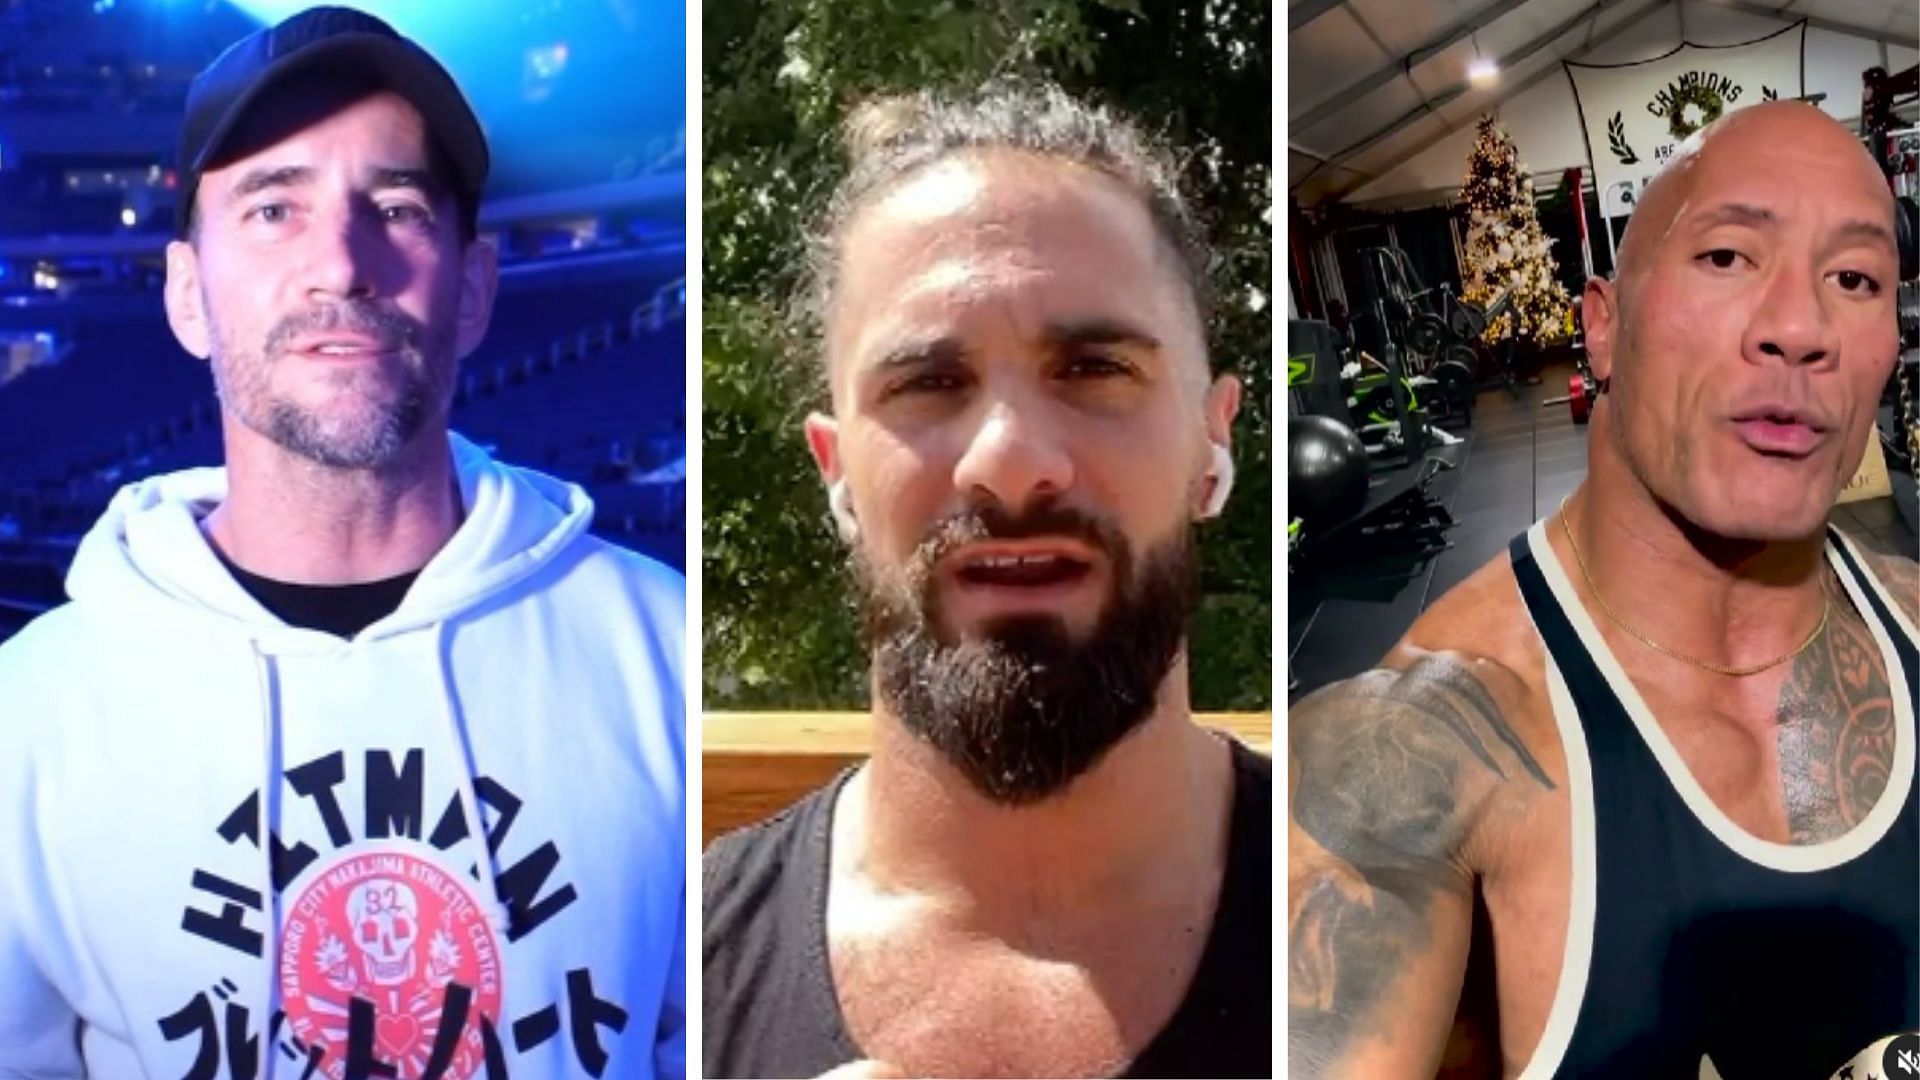 CM Punk on the left, Seth Rollins in the middle, The Rock on the right